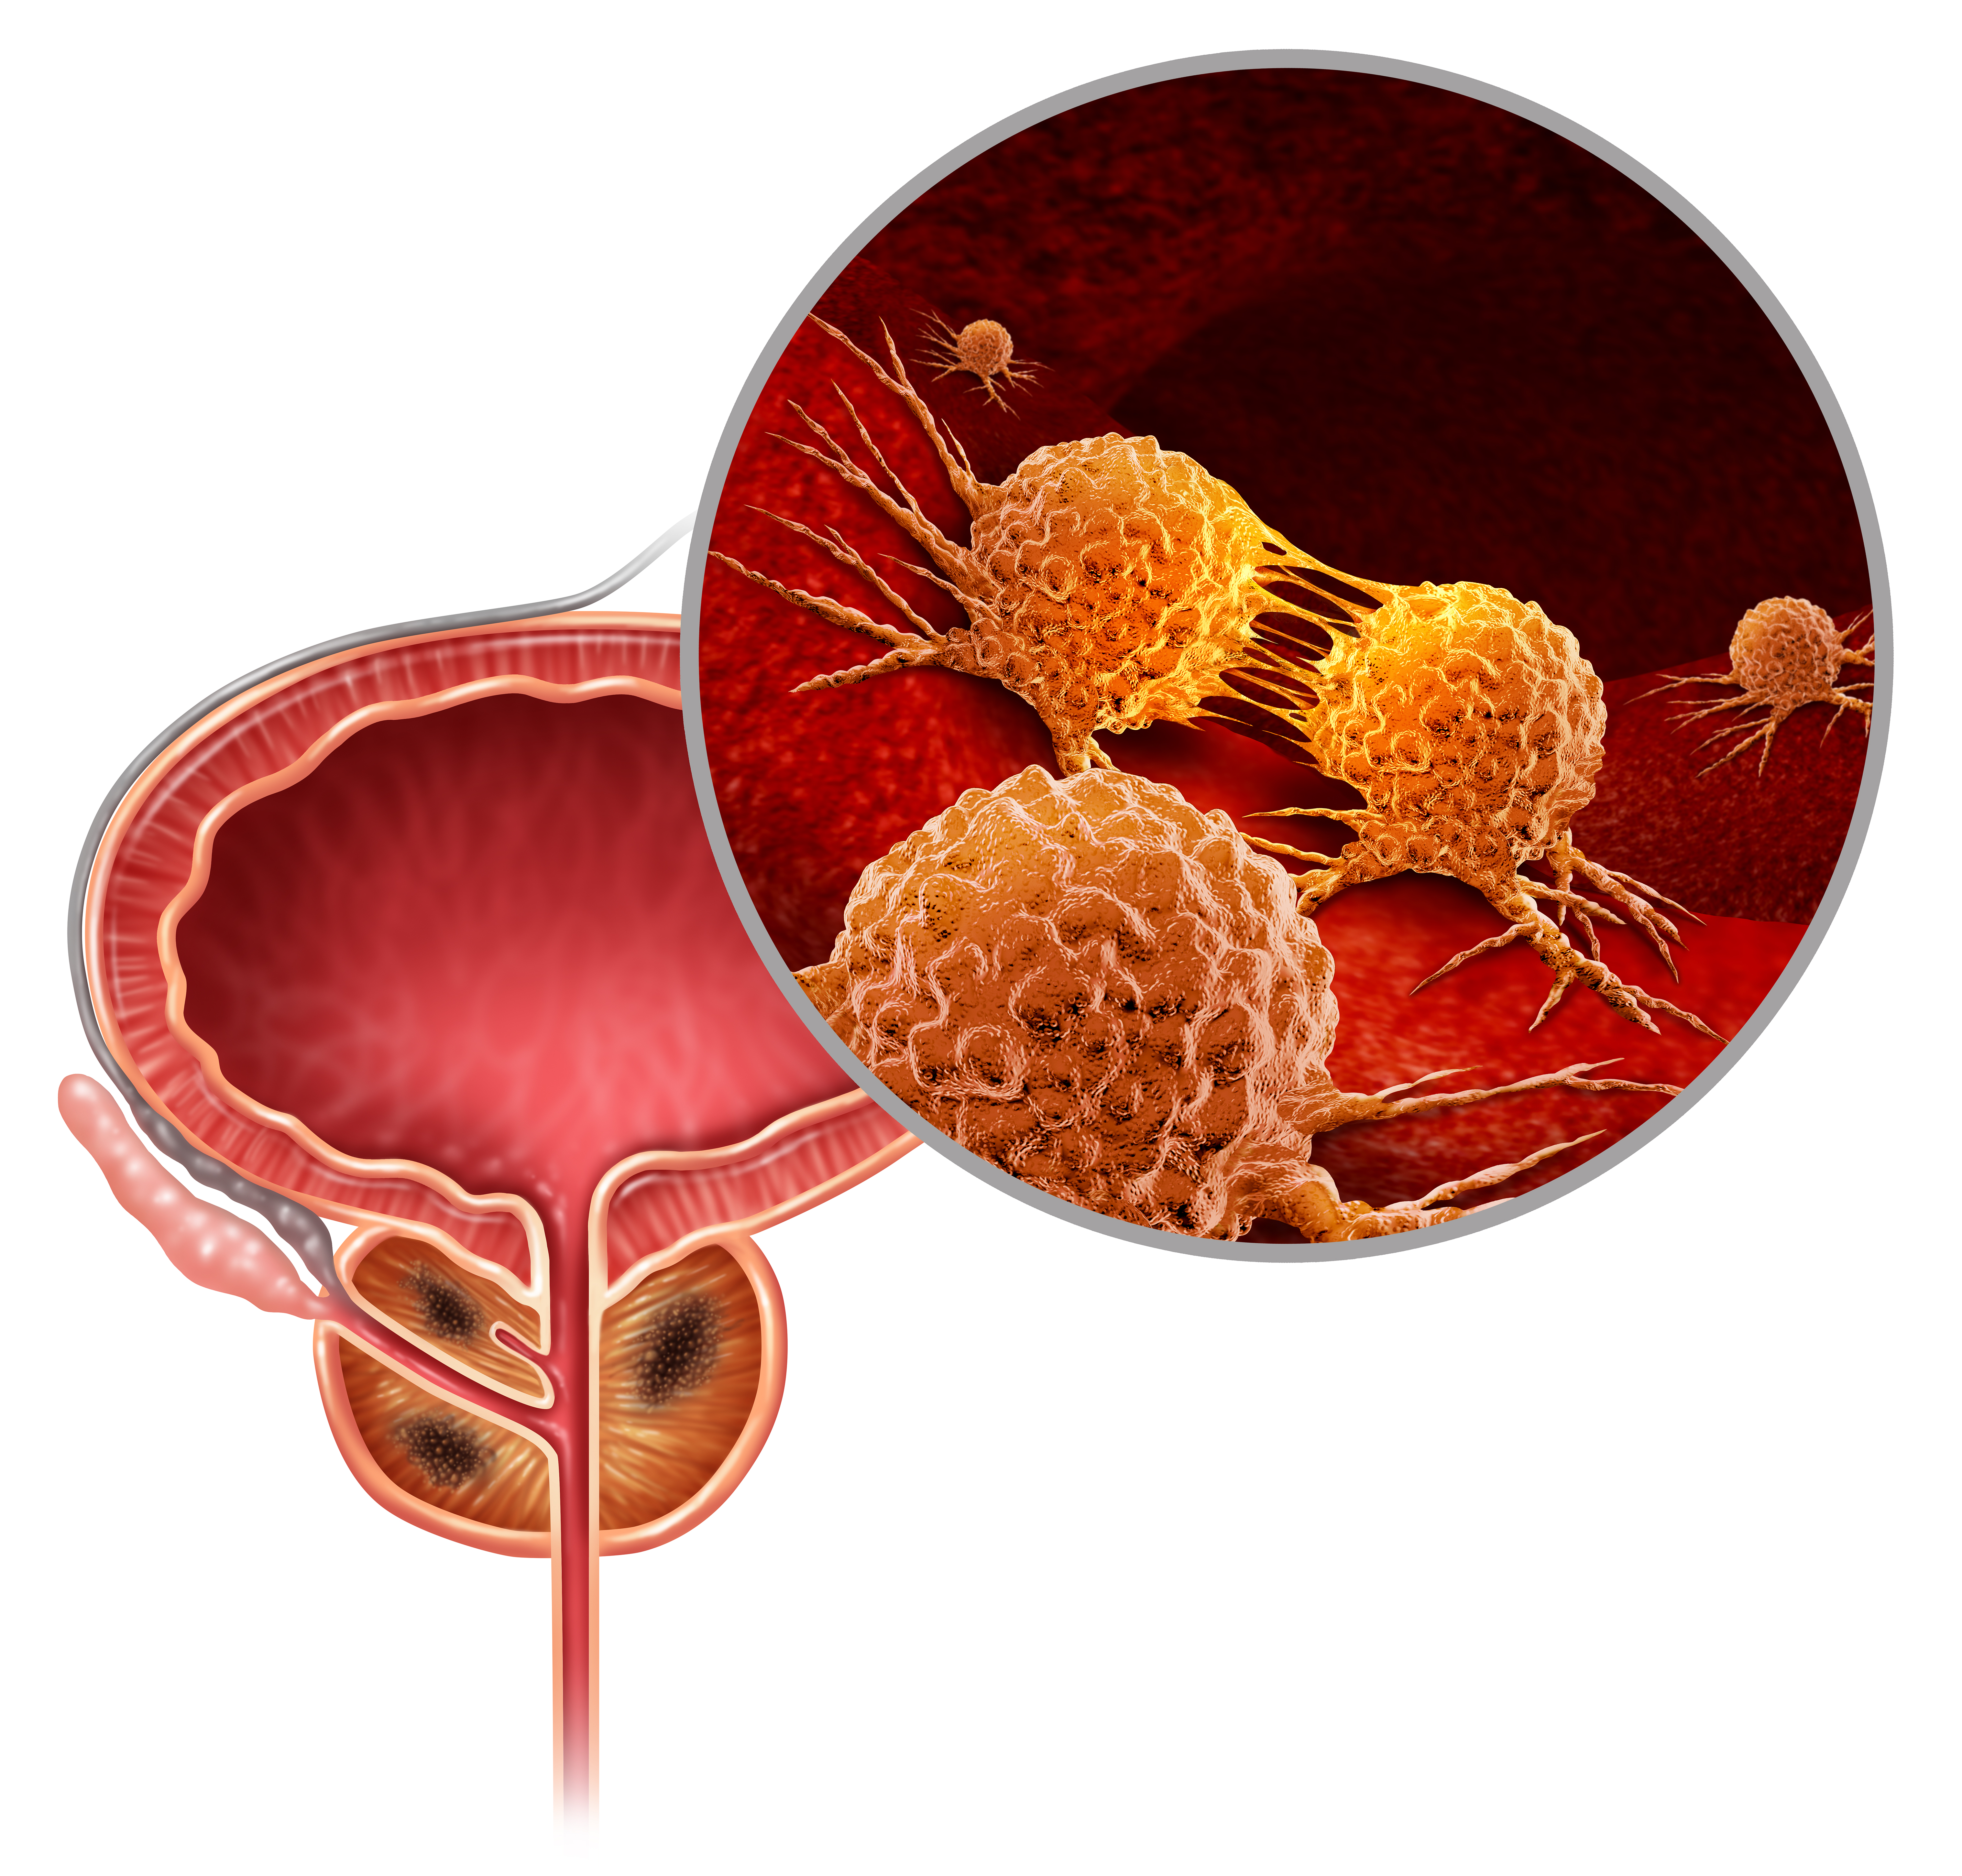 Peptidomimetic-Steroid Conjugates for Castration-Resistant Prostate Cancer (CRPC) Treatment